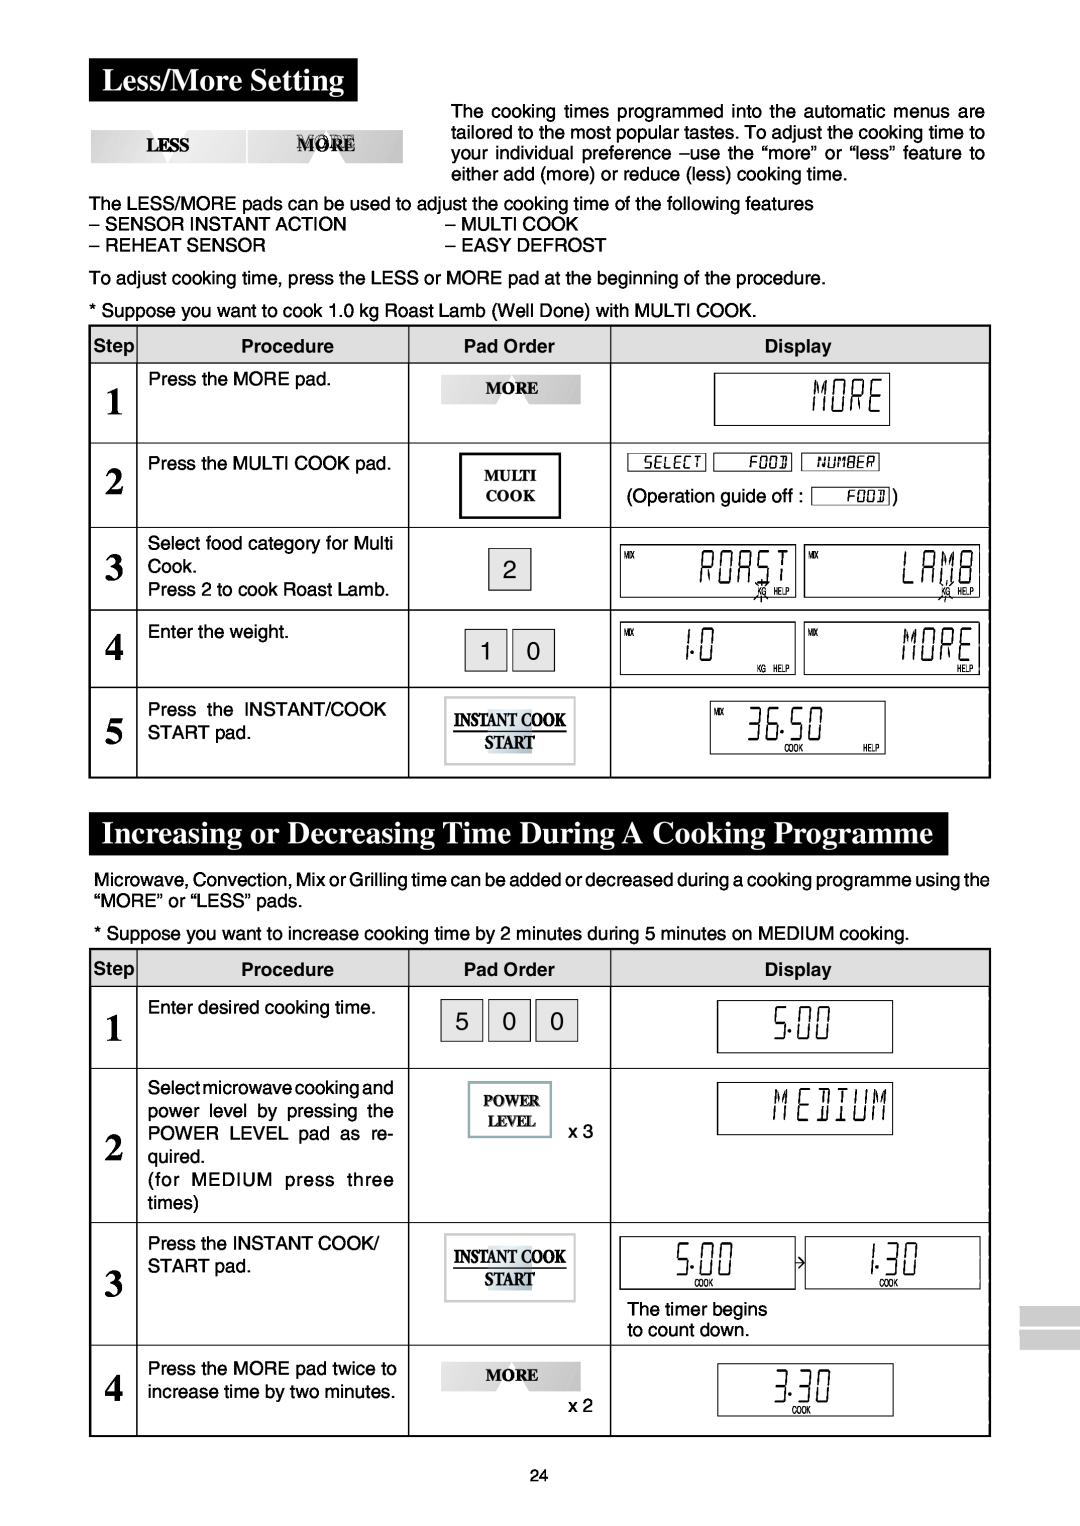 Sharp R-980E operation manual Less/More Setting, Increasing or Decreasing Time During A Cooking Programme, Lessmore 